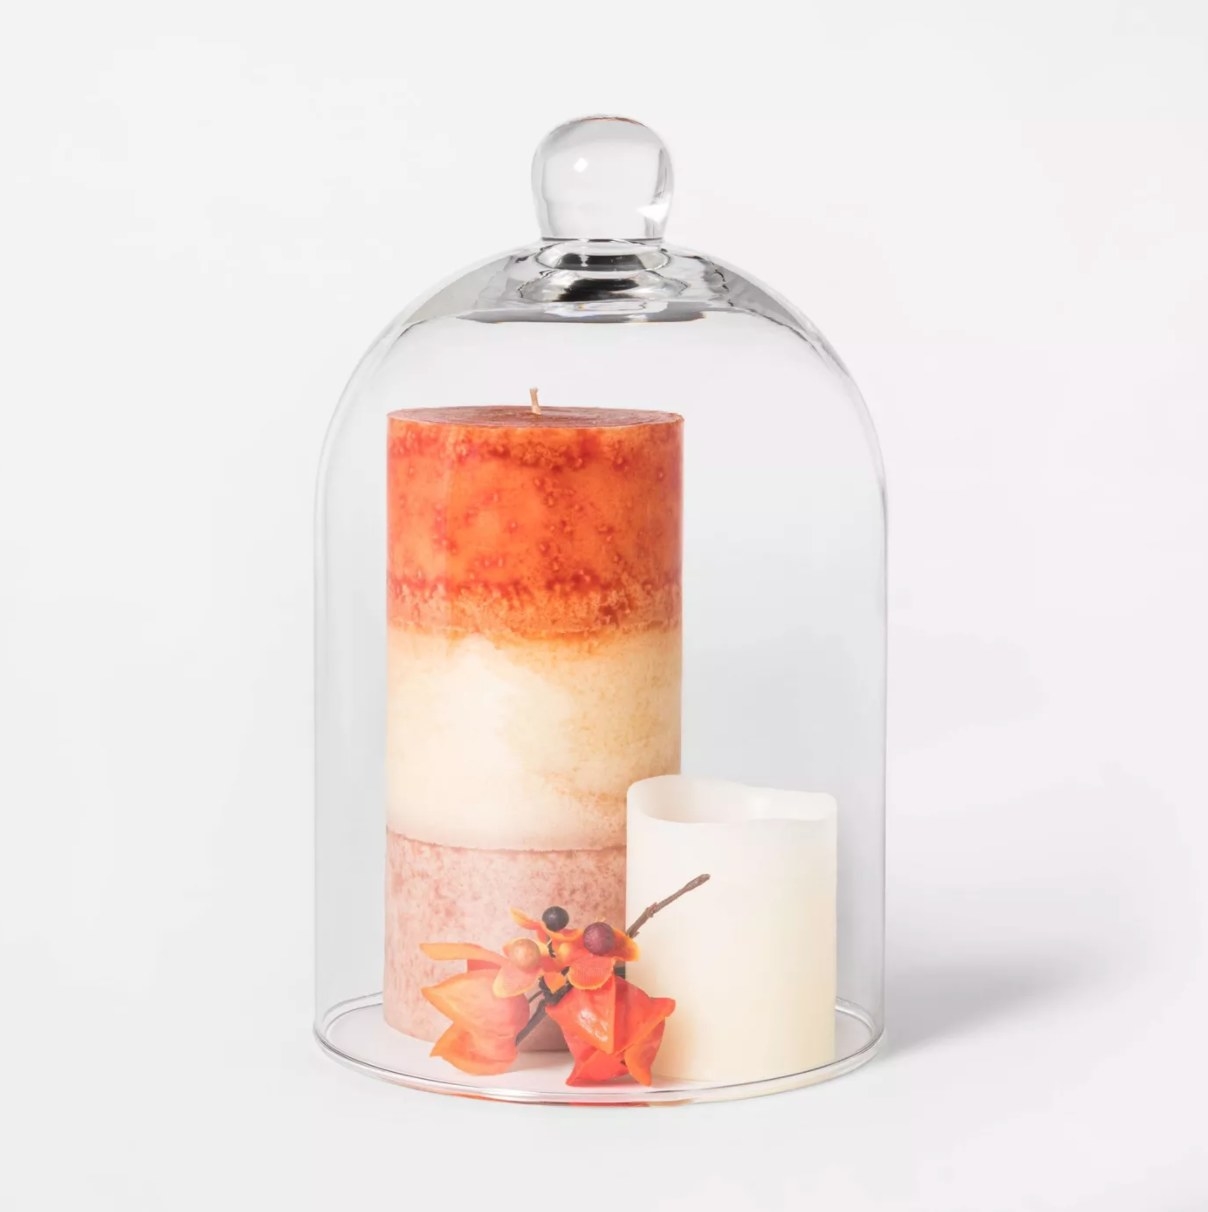 The glass pillar candle holder